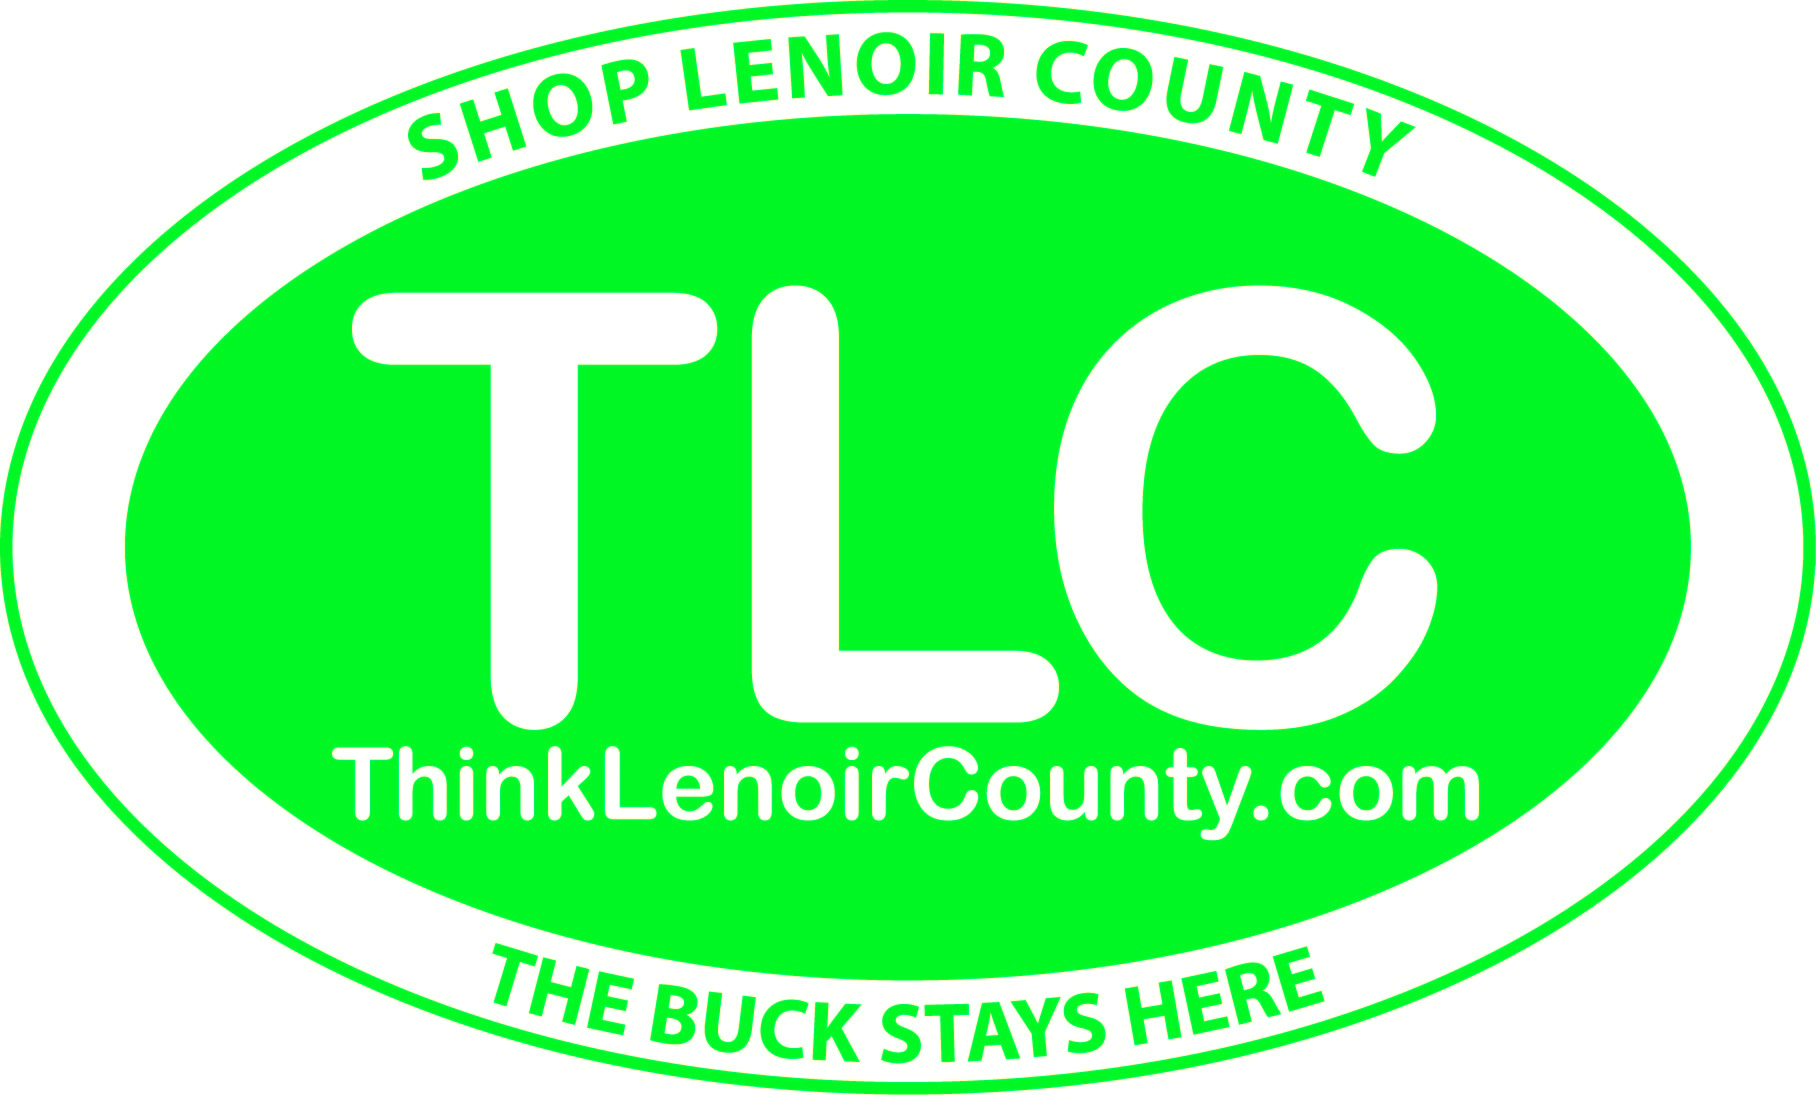 What Has a Green Oval Logo - Think Lenoir County - TLC in Businesses